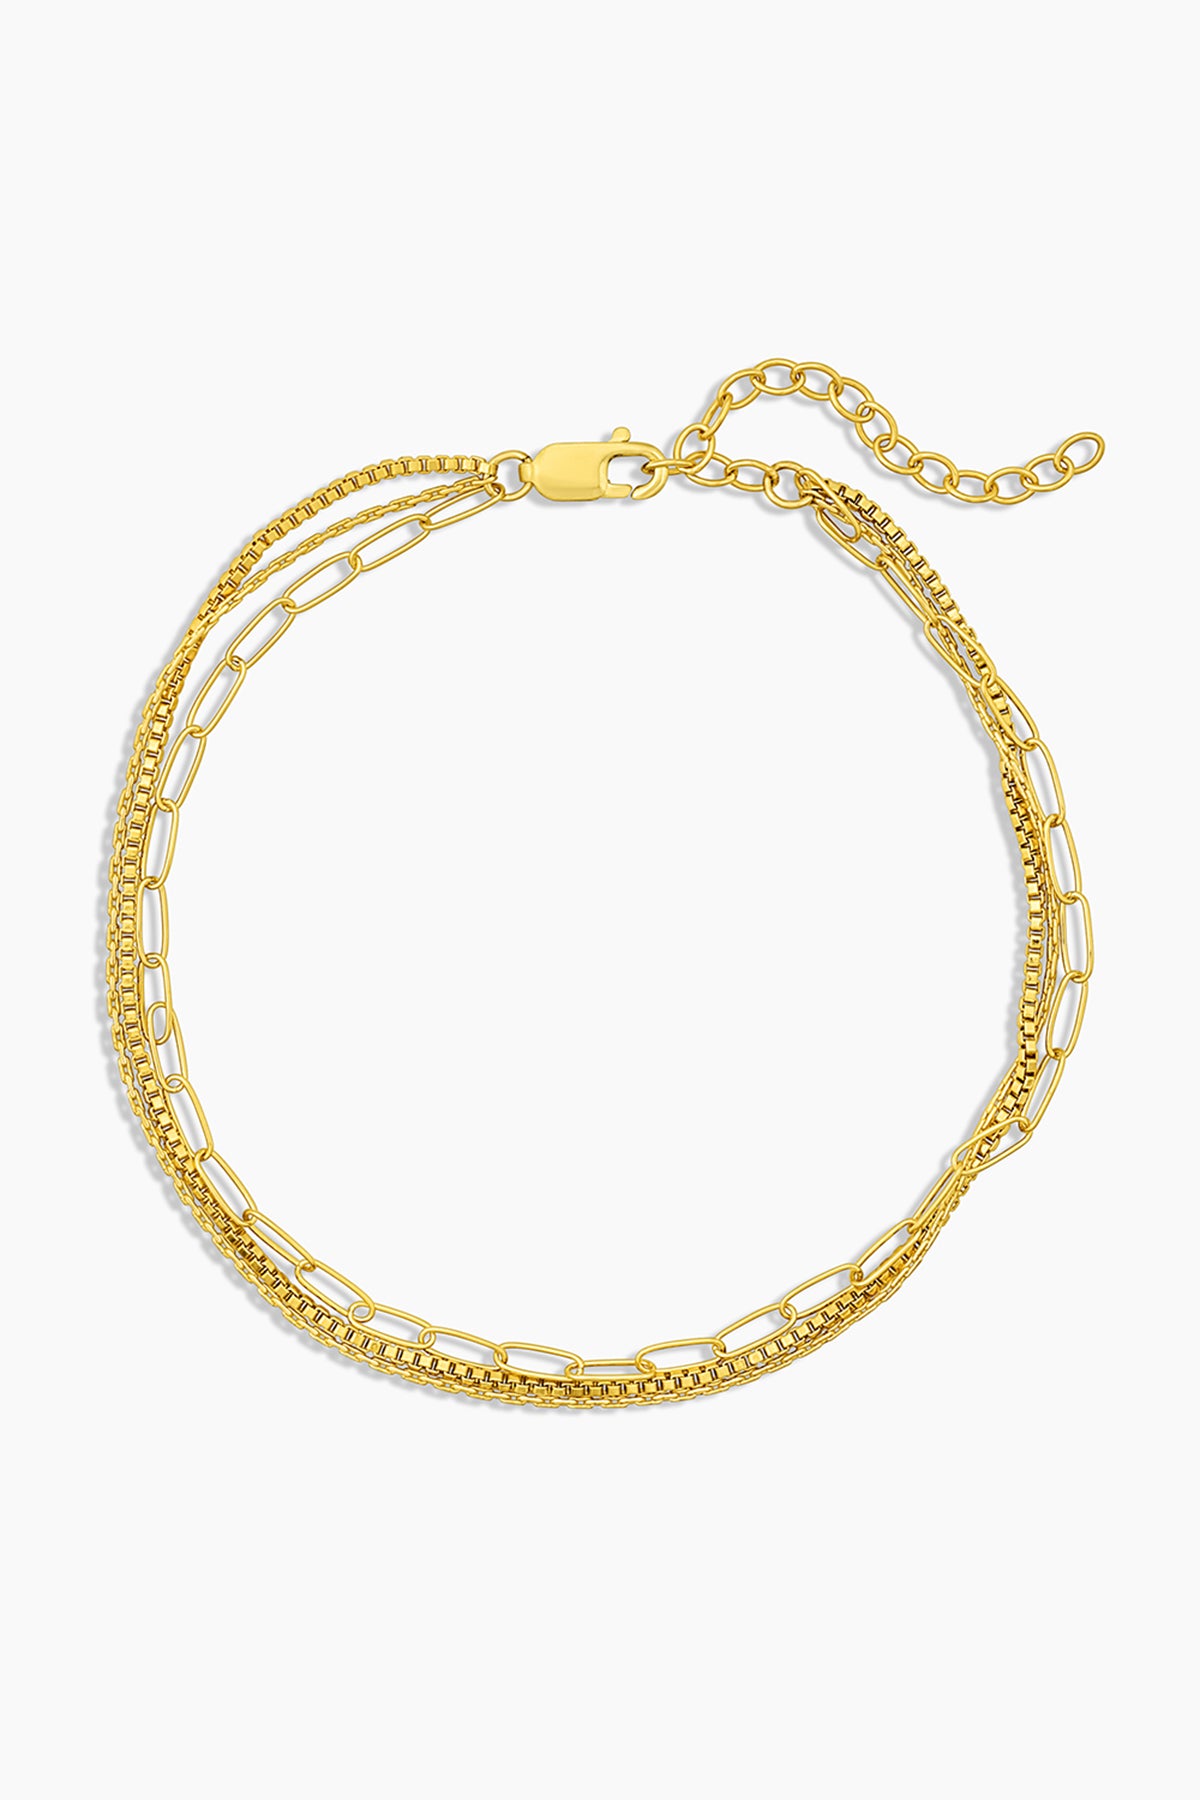   A ROSALIE TRIPLE STRAND BRACELET BY Thatch with a chain link clasp. 